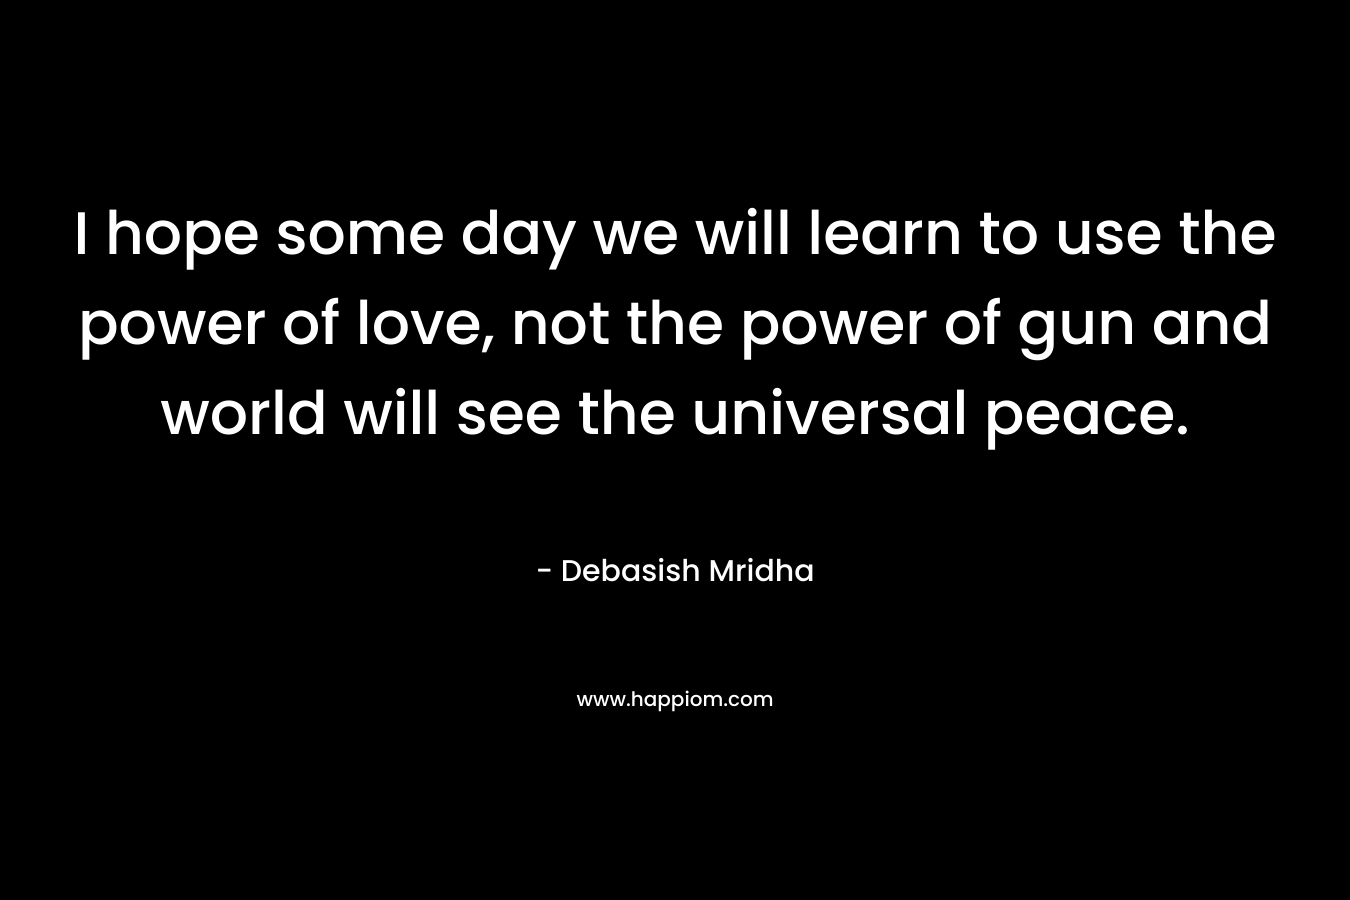 I hope some day we will learn to use the power of love, not the power of gun and world will see the universal peace.